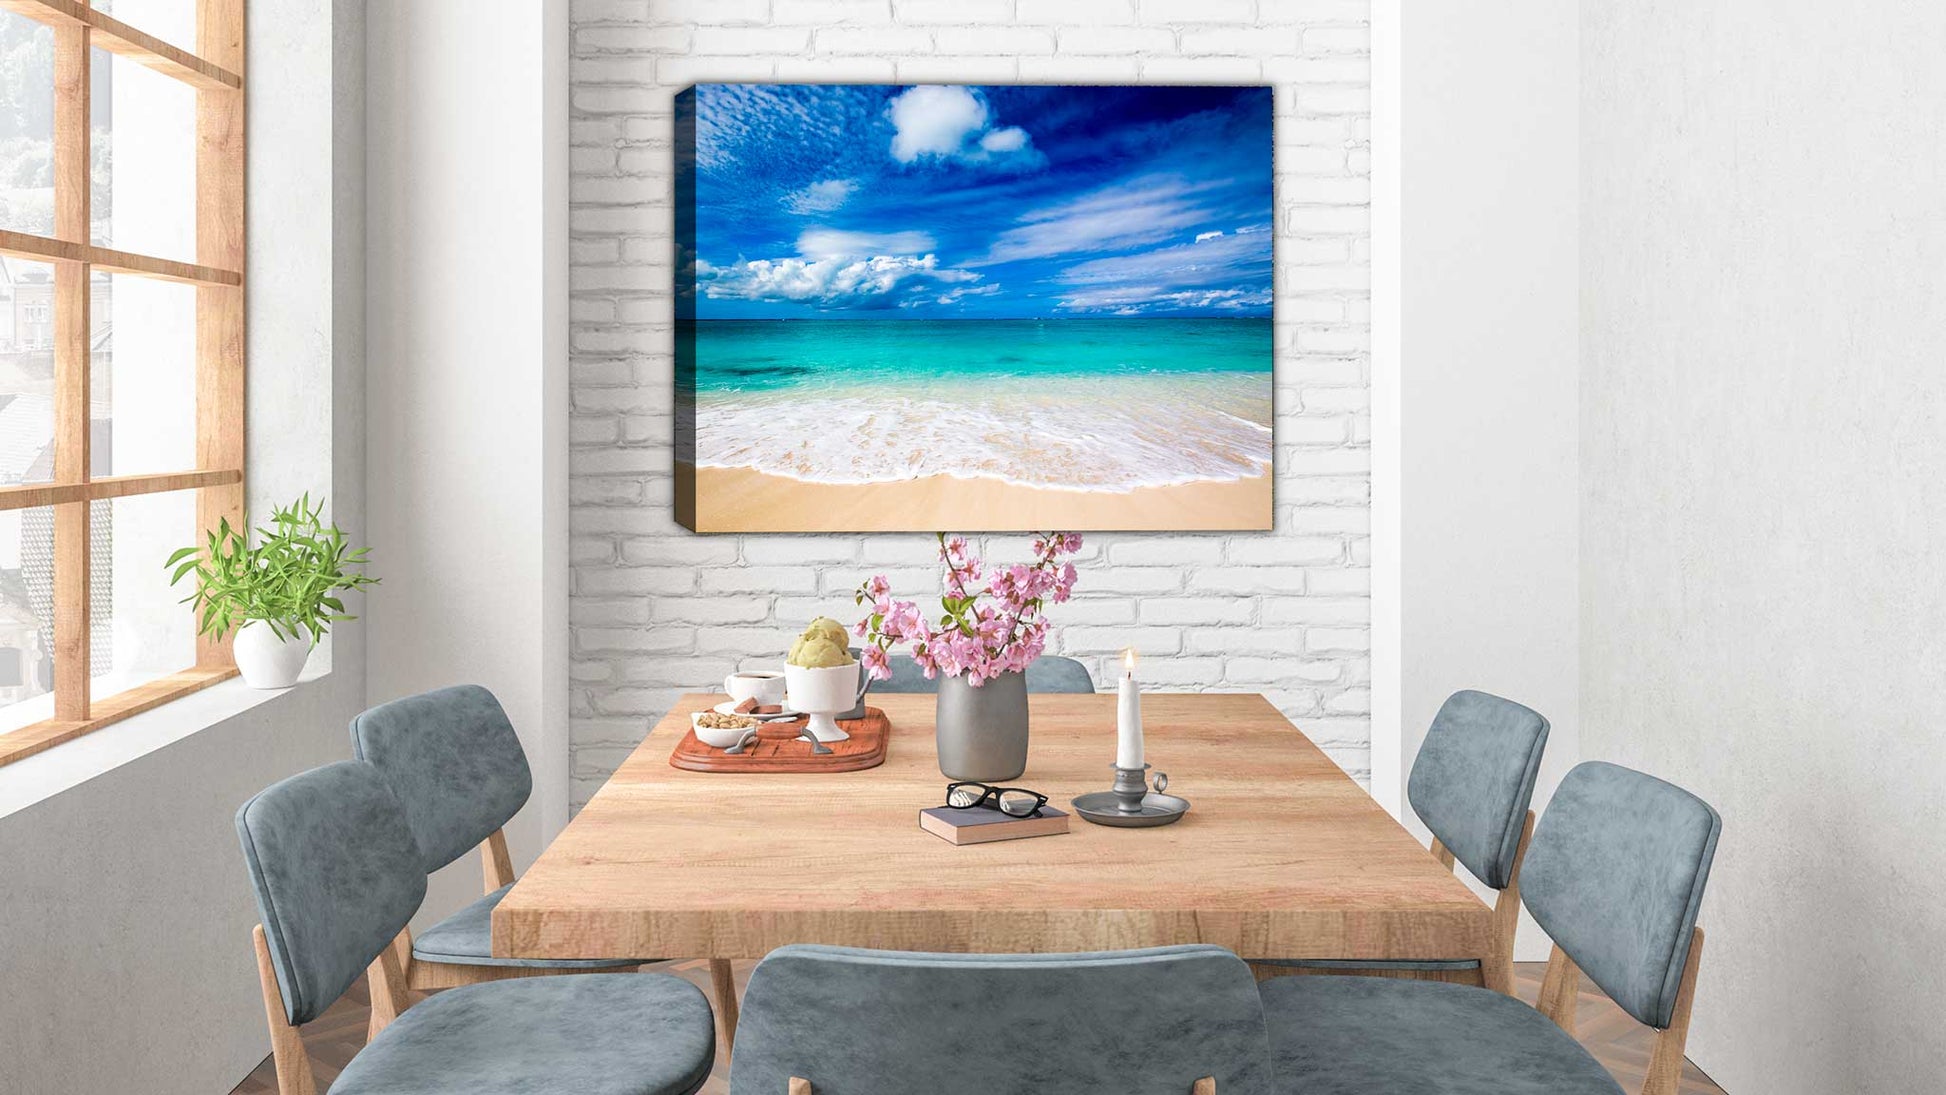 Beach and Ocean Image - Canvas Print Hung on Living Room Wall, environment